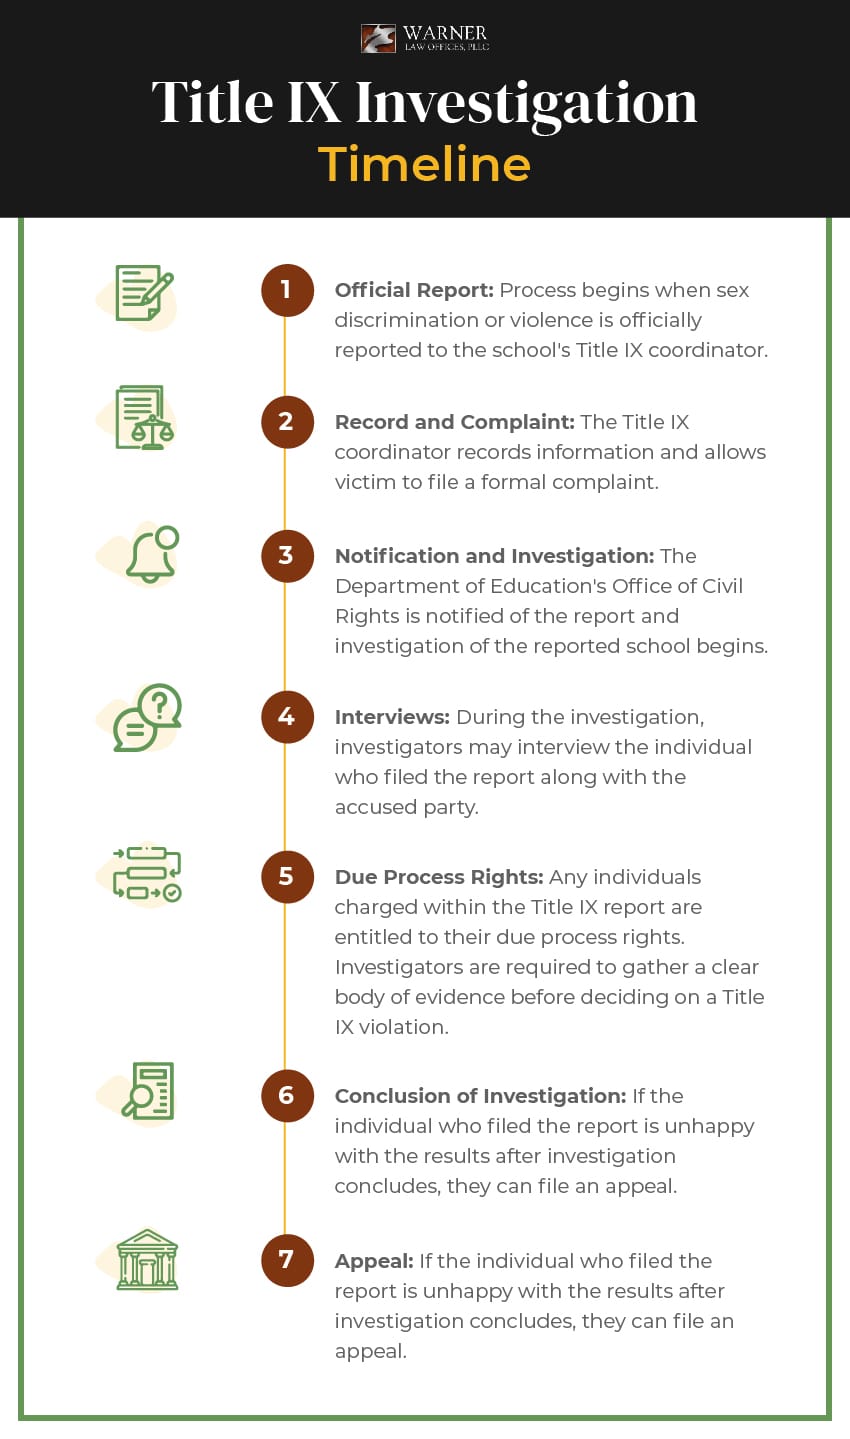 infographic showing timeline of events for title ix investigations